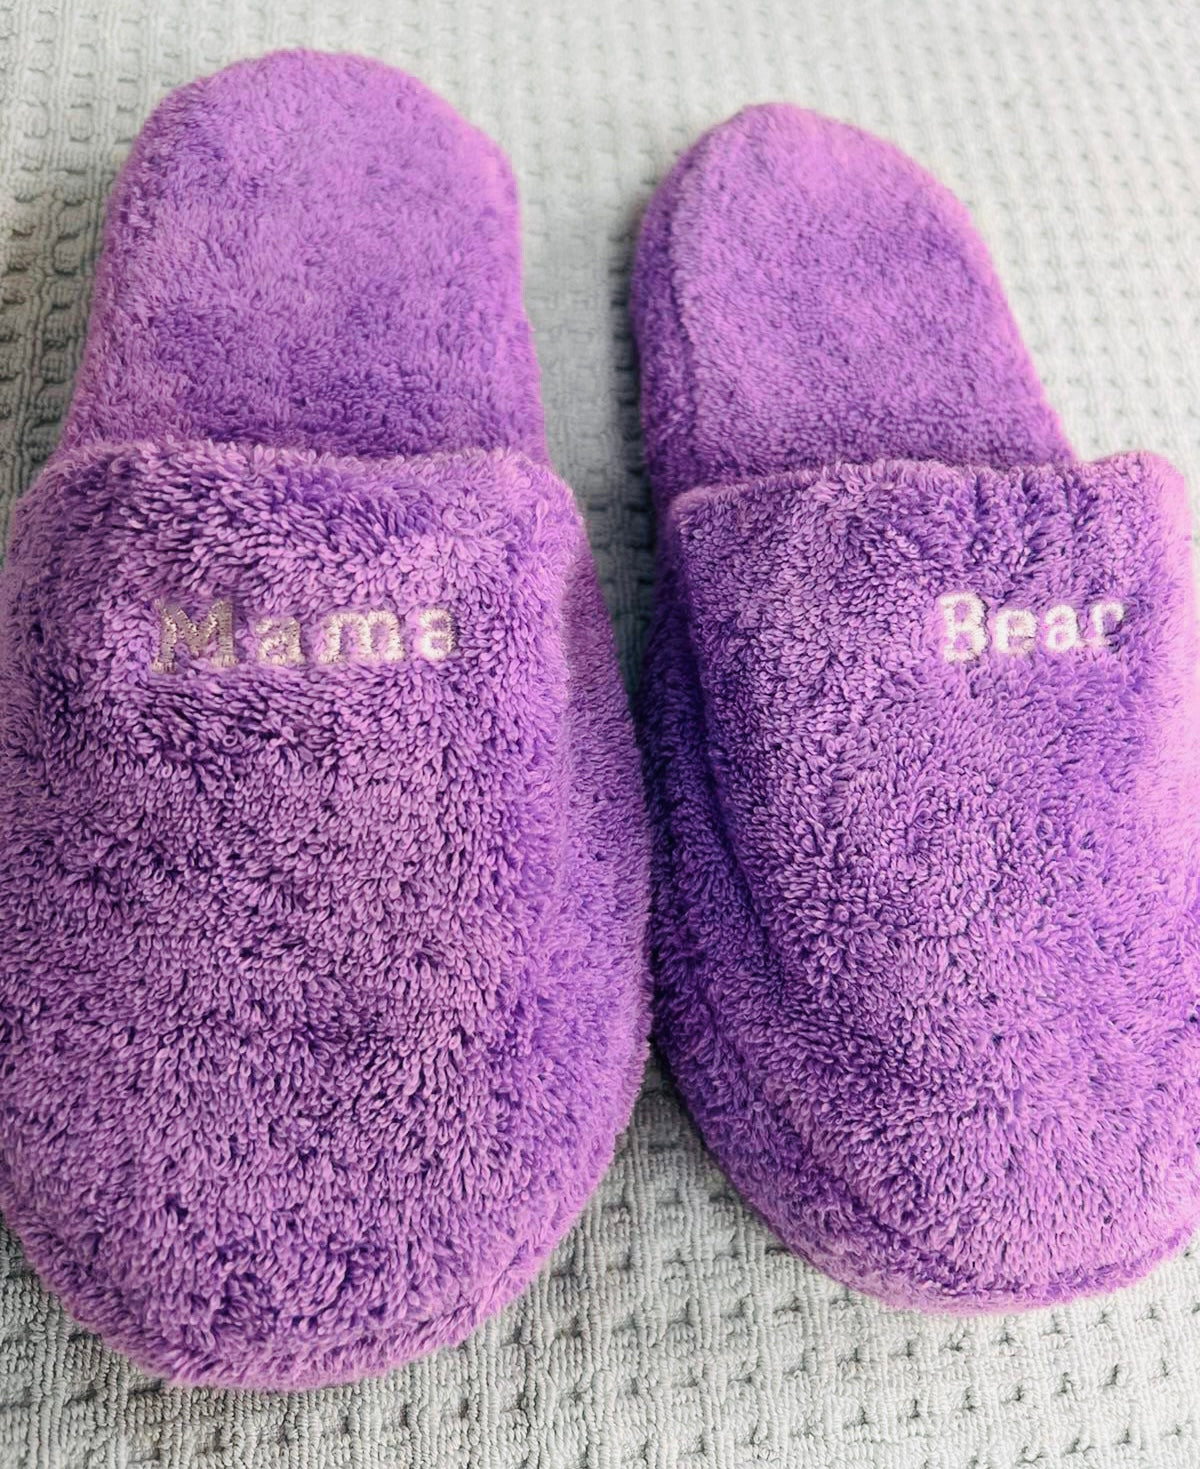 Terry Slippers, Soft & Plush Comfortable Lounging, Made in Turkey